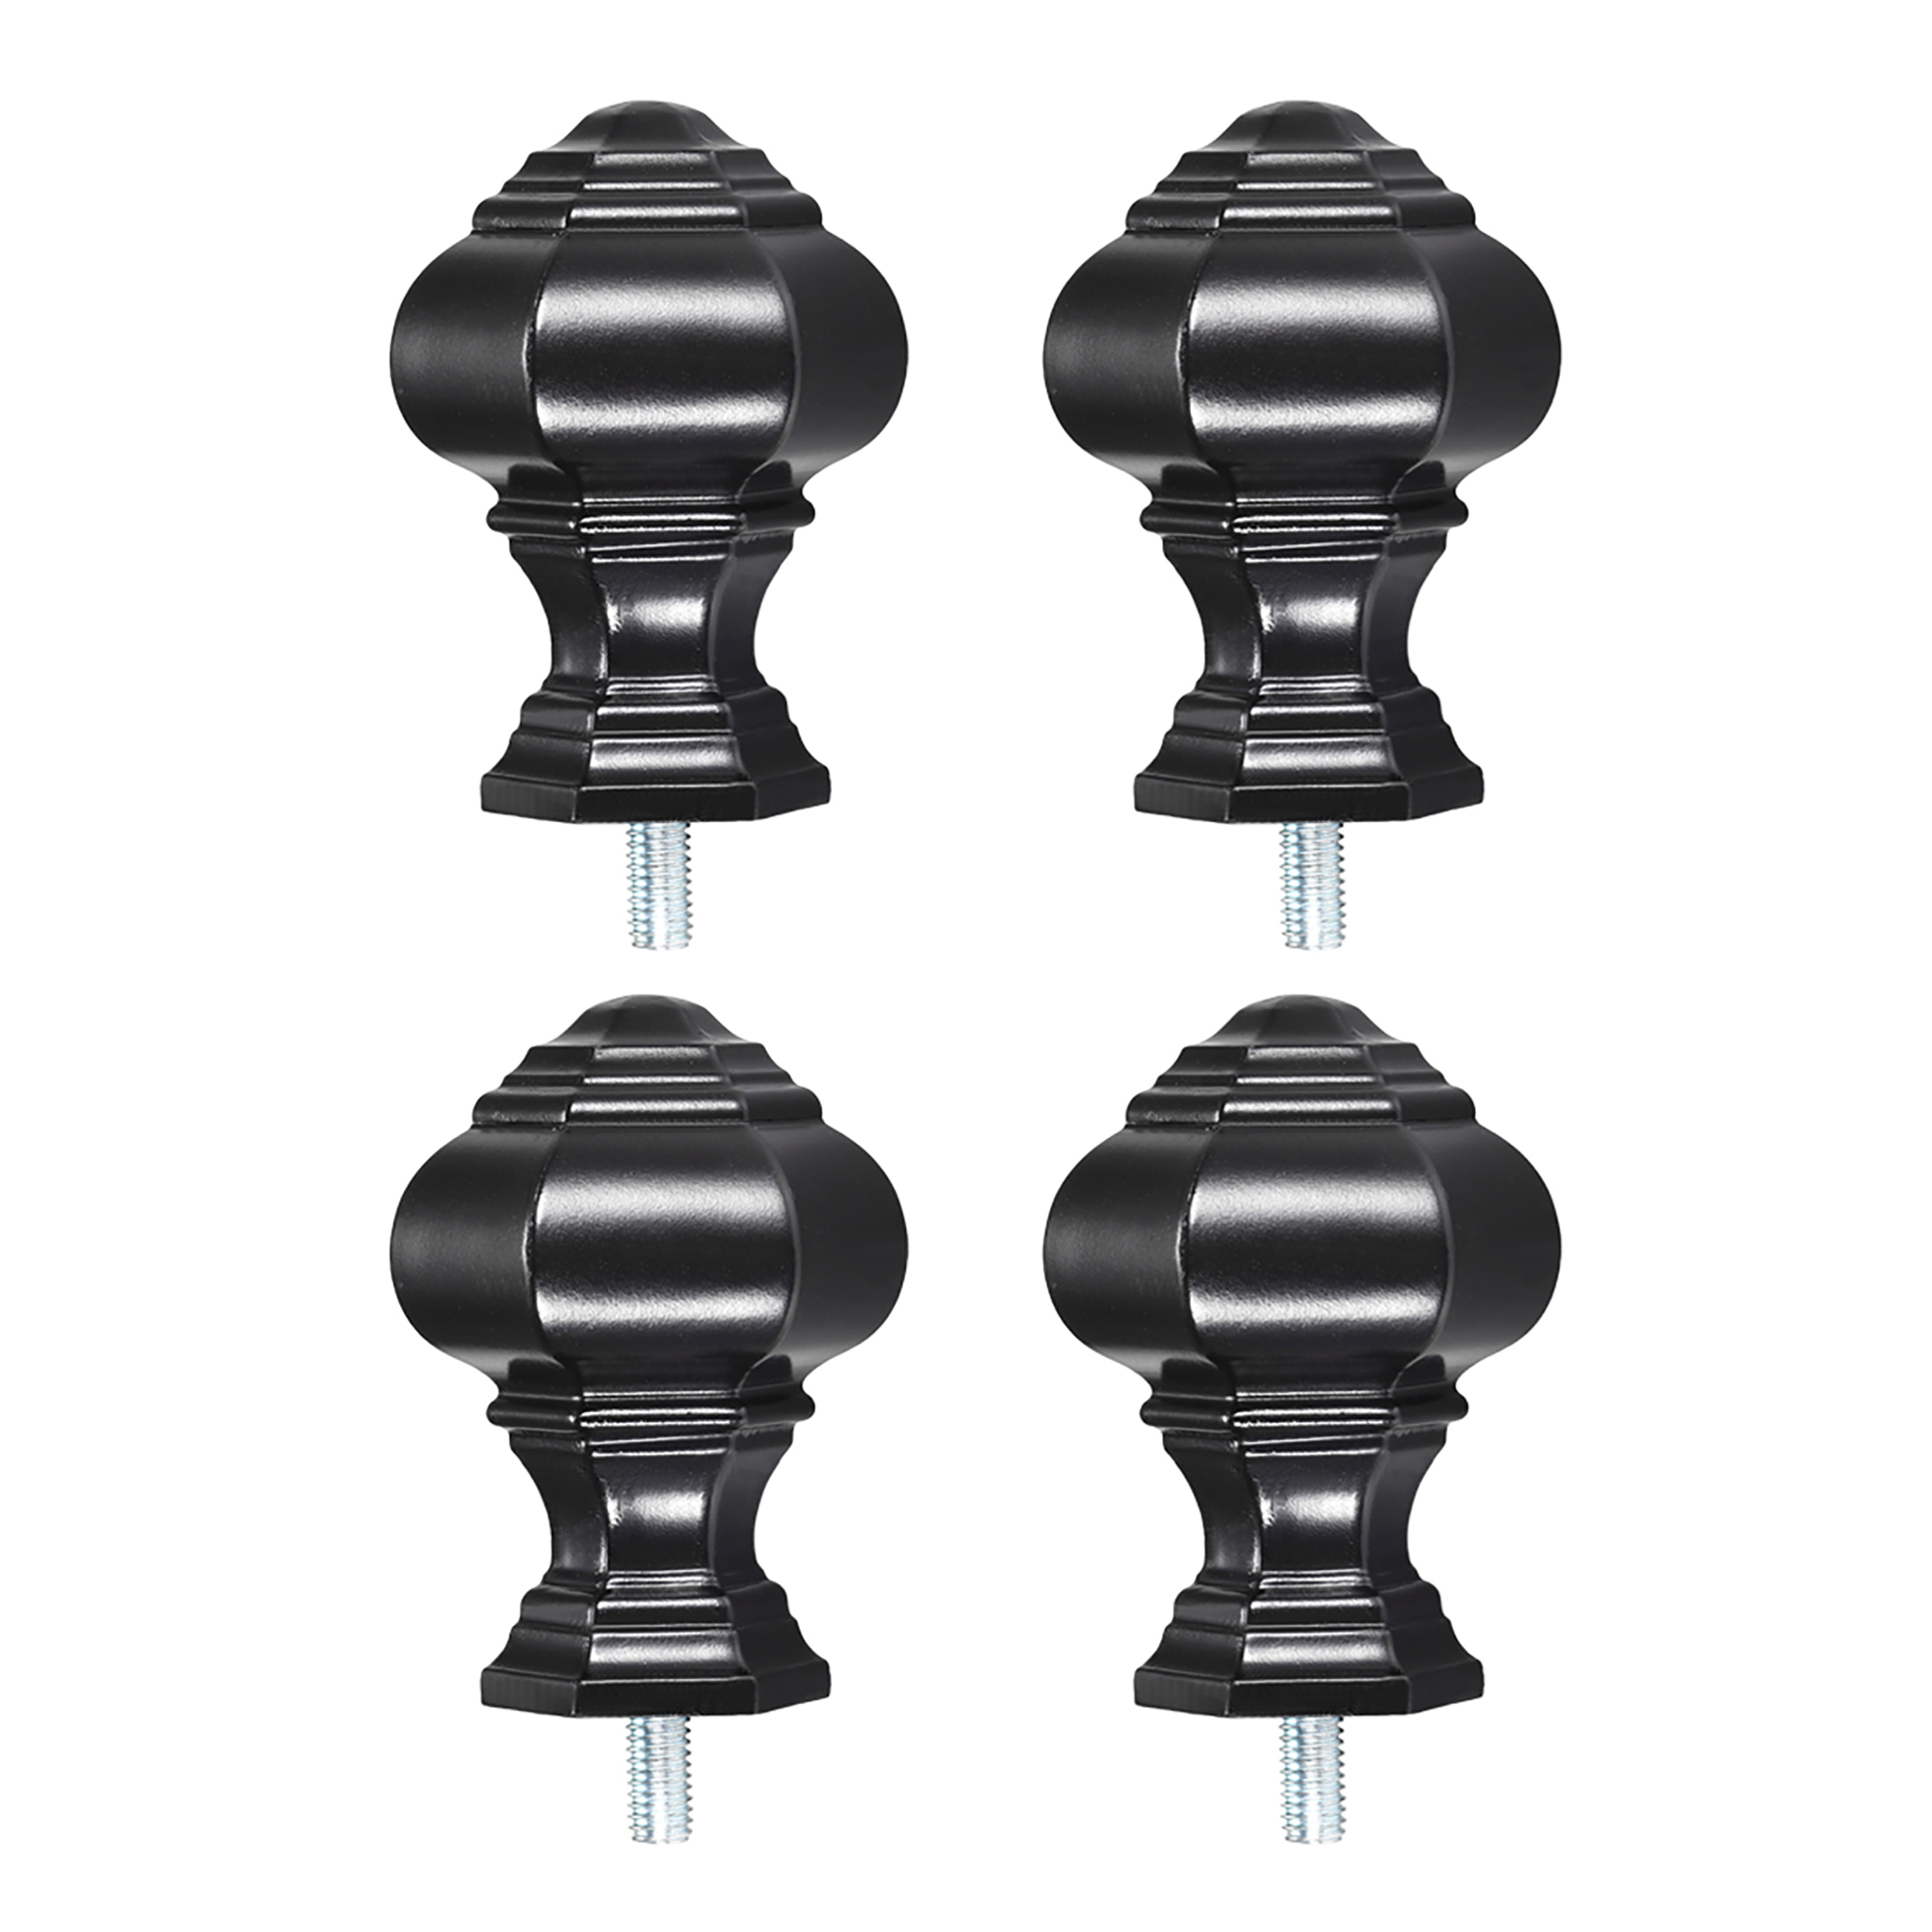 Uxcell 14mm Dia Curtain Rod Finials Plastic Black 4Pack - image 1 of 7